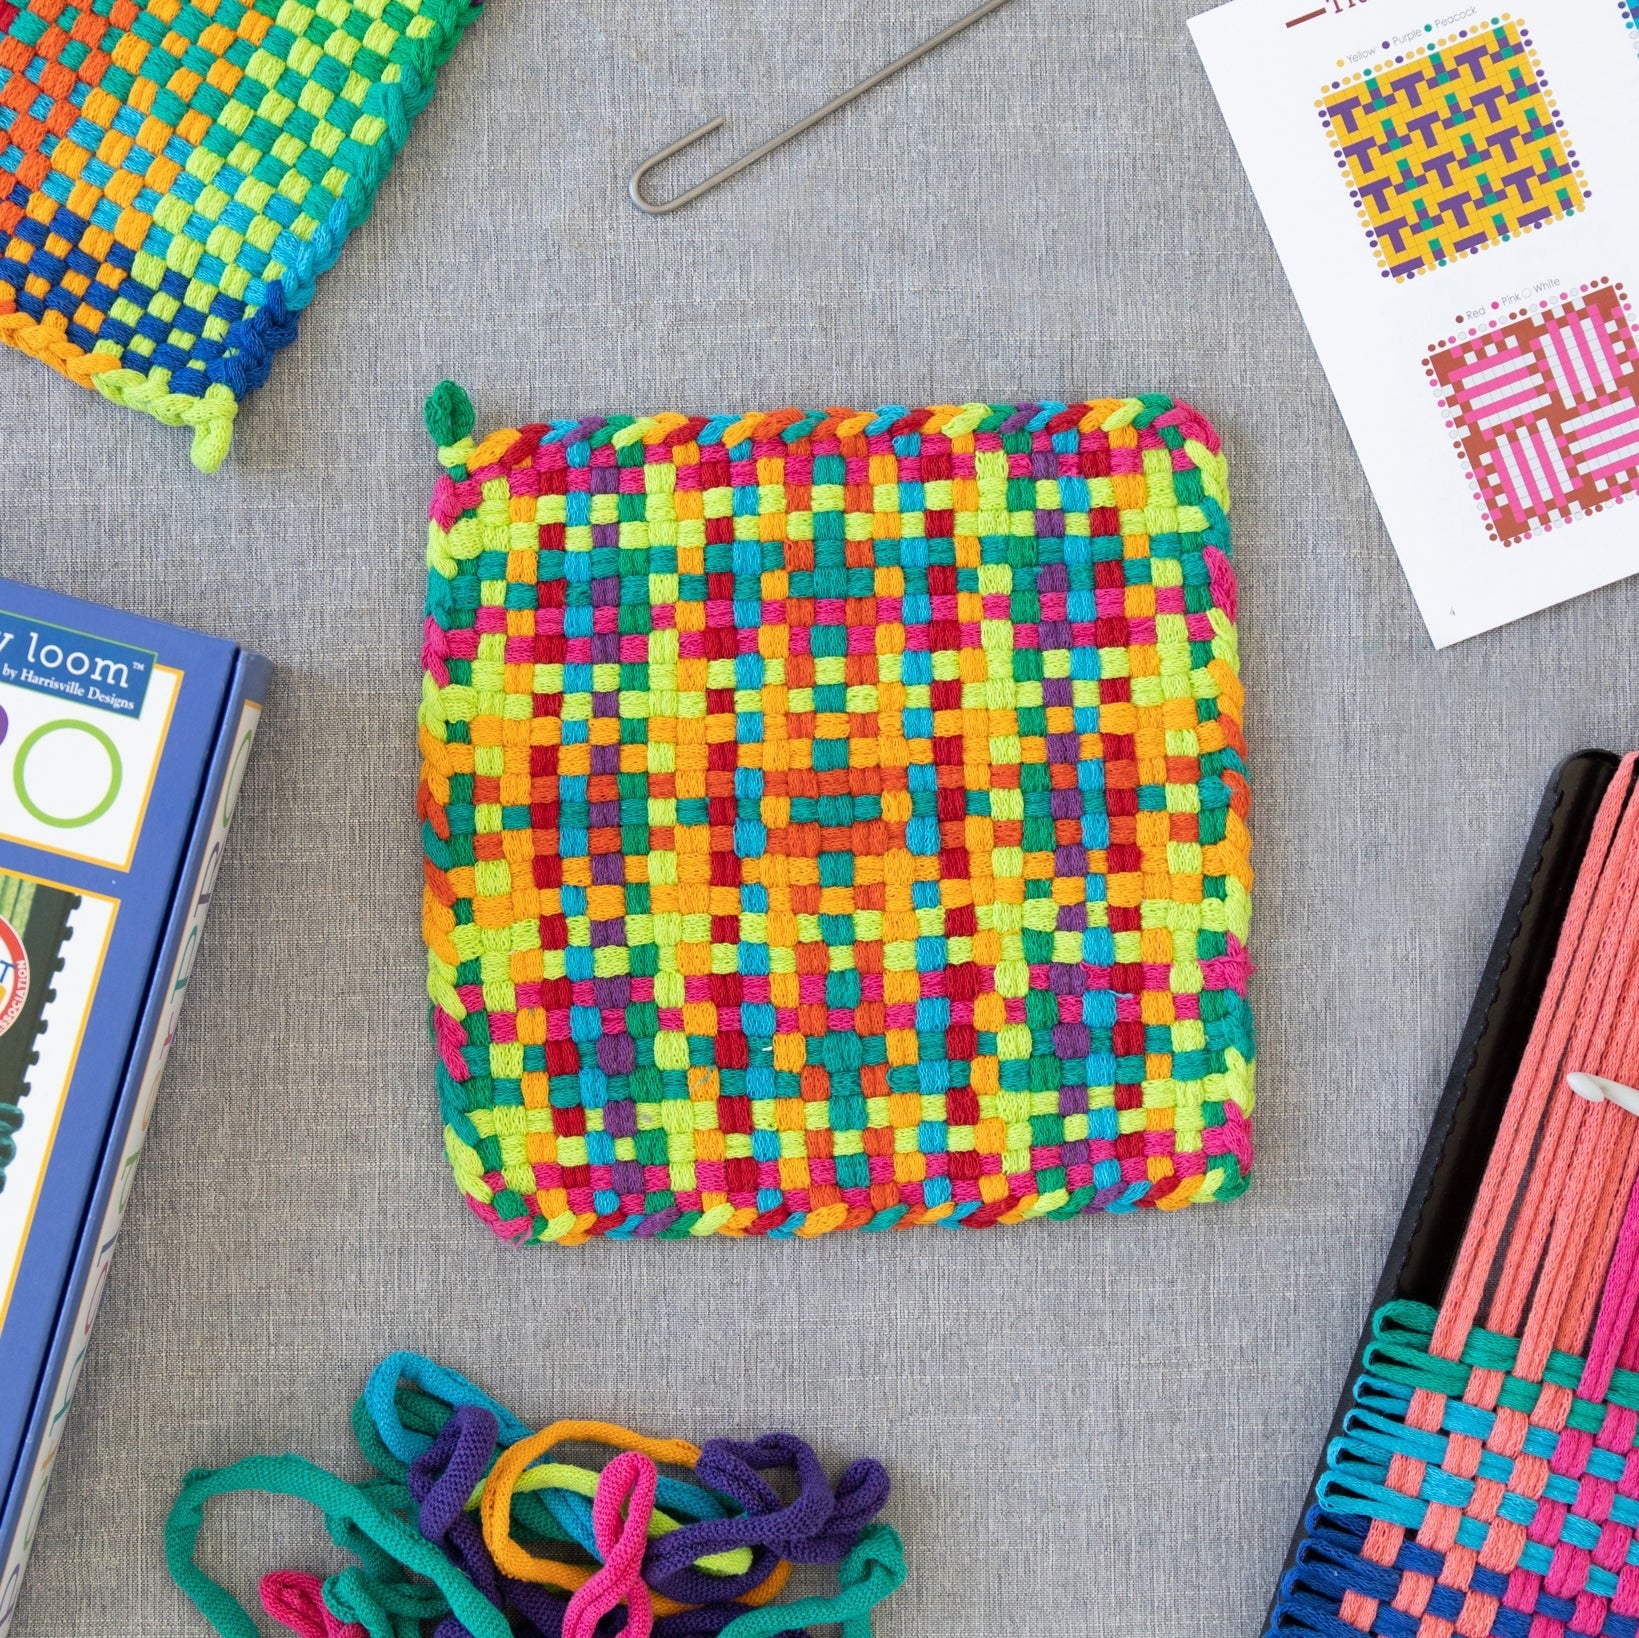 Friendly Loom PRO Size Lotta Loops Rainbow Cotton Loops Makes 6 (8 x 8)  Potholders by Harrisville Designs Made in The USA